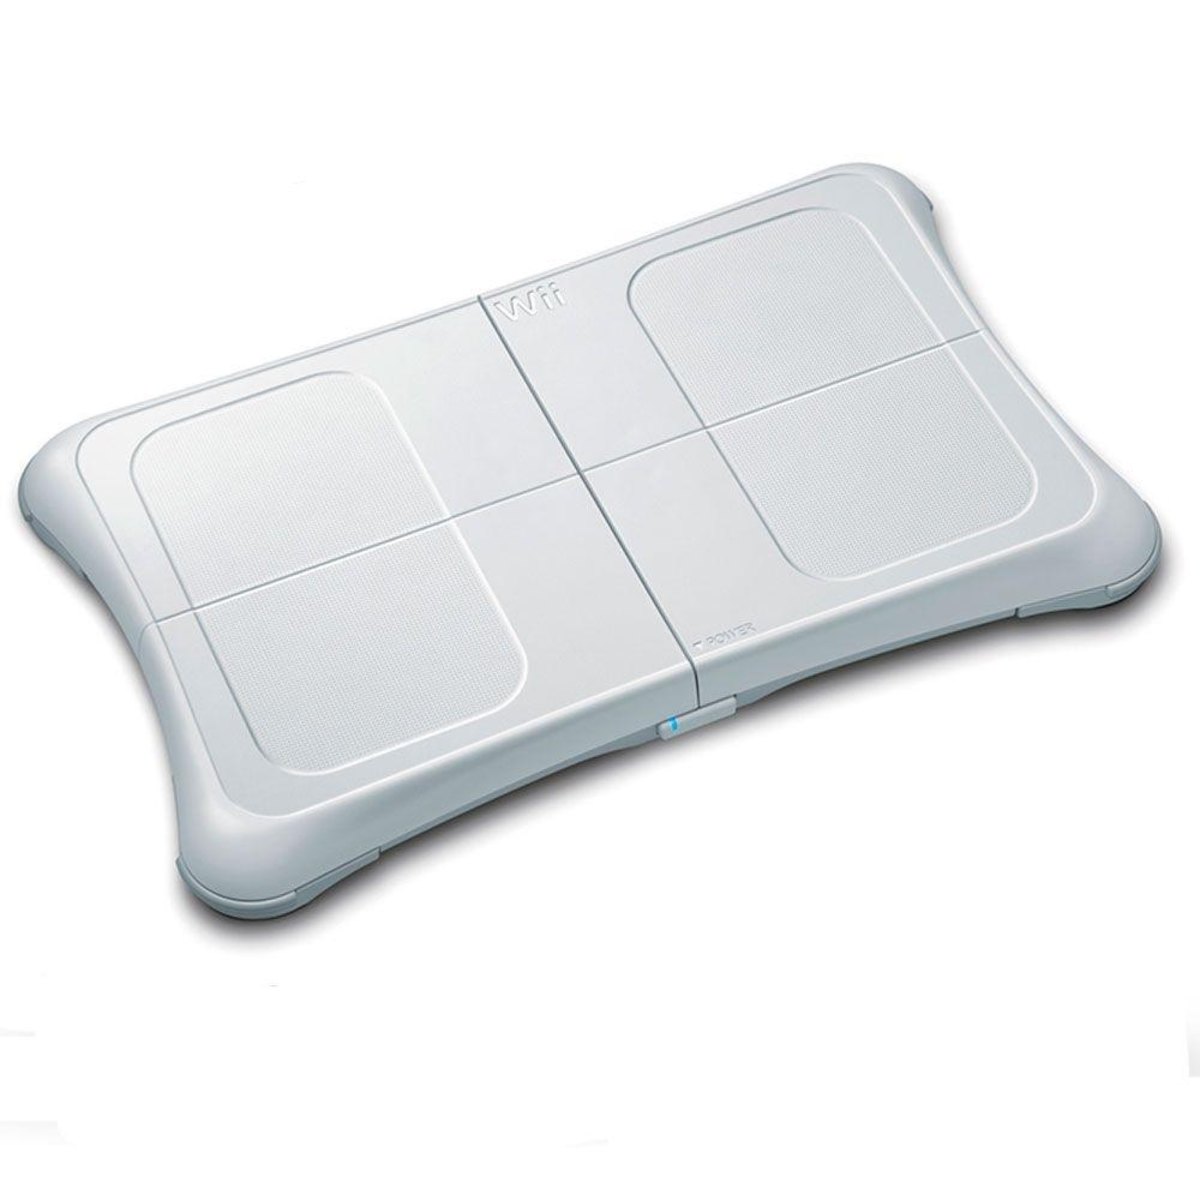 Wii Fit Balance Board com Game Wii Fit - Nintendo Wii Usado